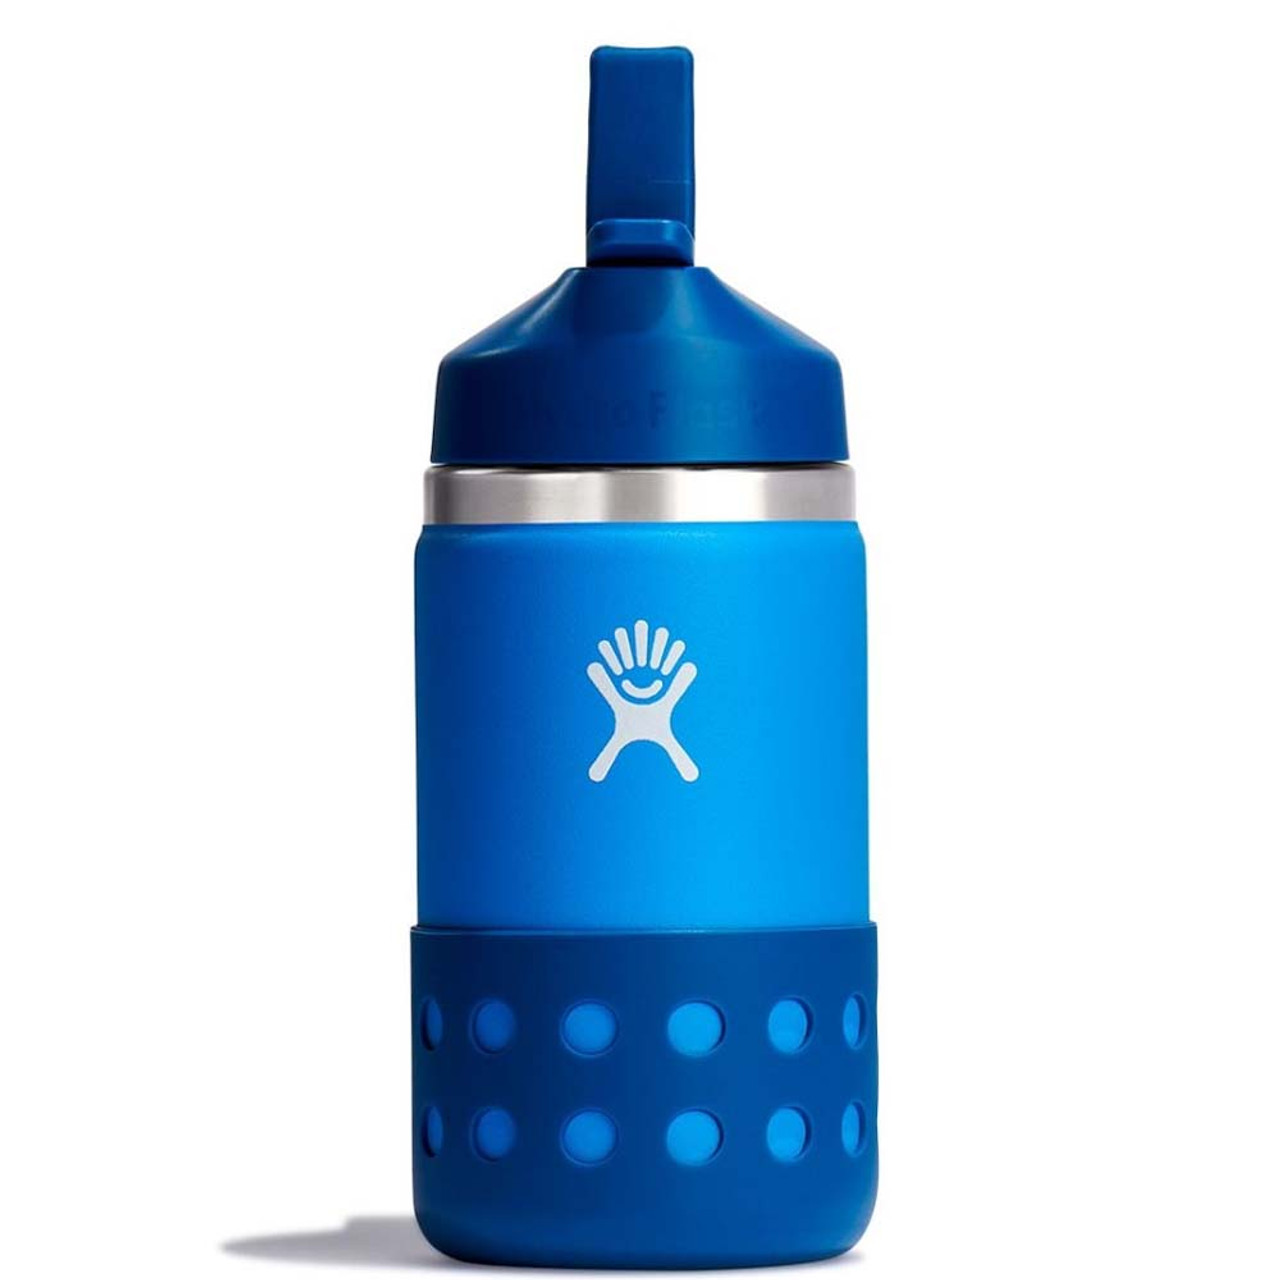 Kids Water Bottle - 12oz Blue | Leak Proof With Straw & Handle | 24 Hours  Cold | Insulated, Double Wall Stainless Steel | Easy Sip Toddler Cup 